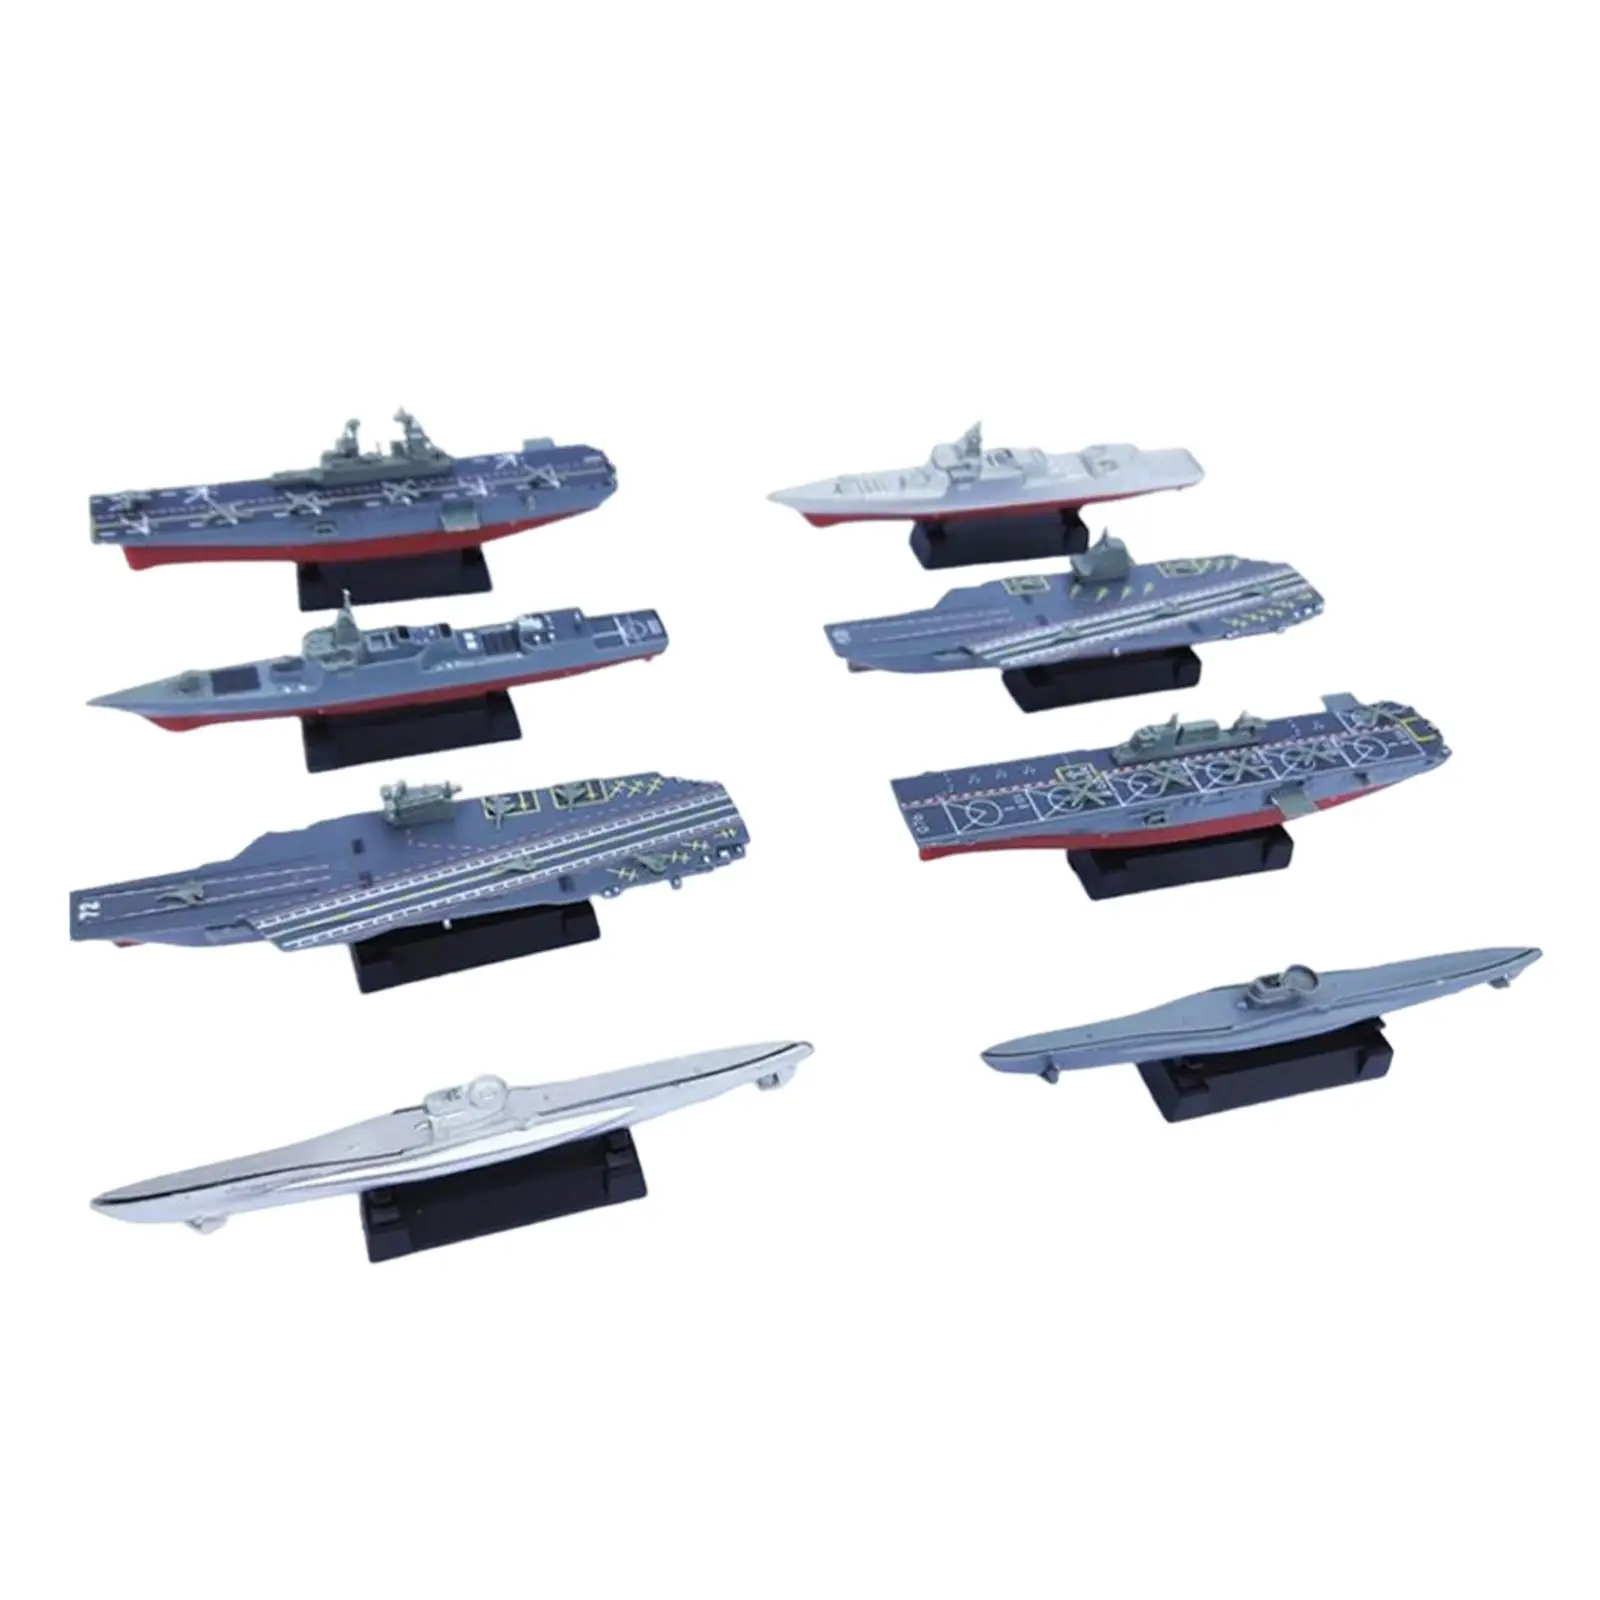 

8Pcs Warship Model Toy, Jigsaw Toys, Educational Toys, Aircraft Carrier Toy for Girls Children Gifts